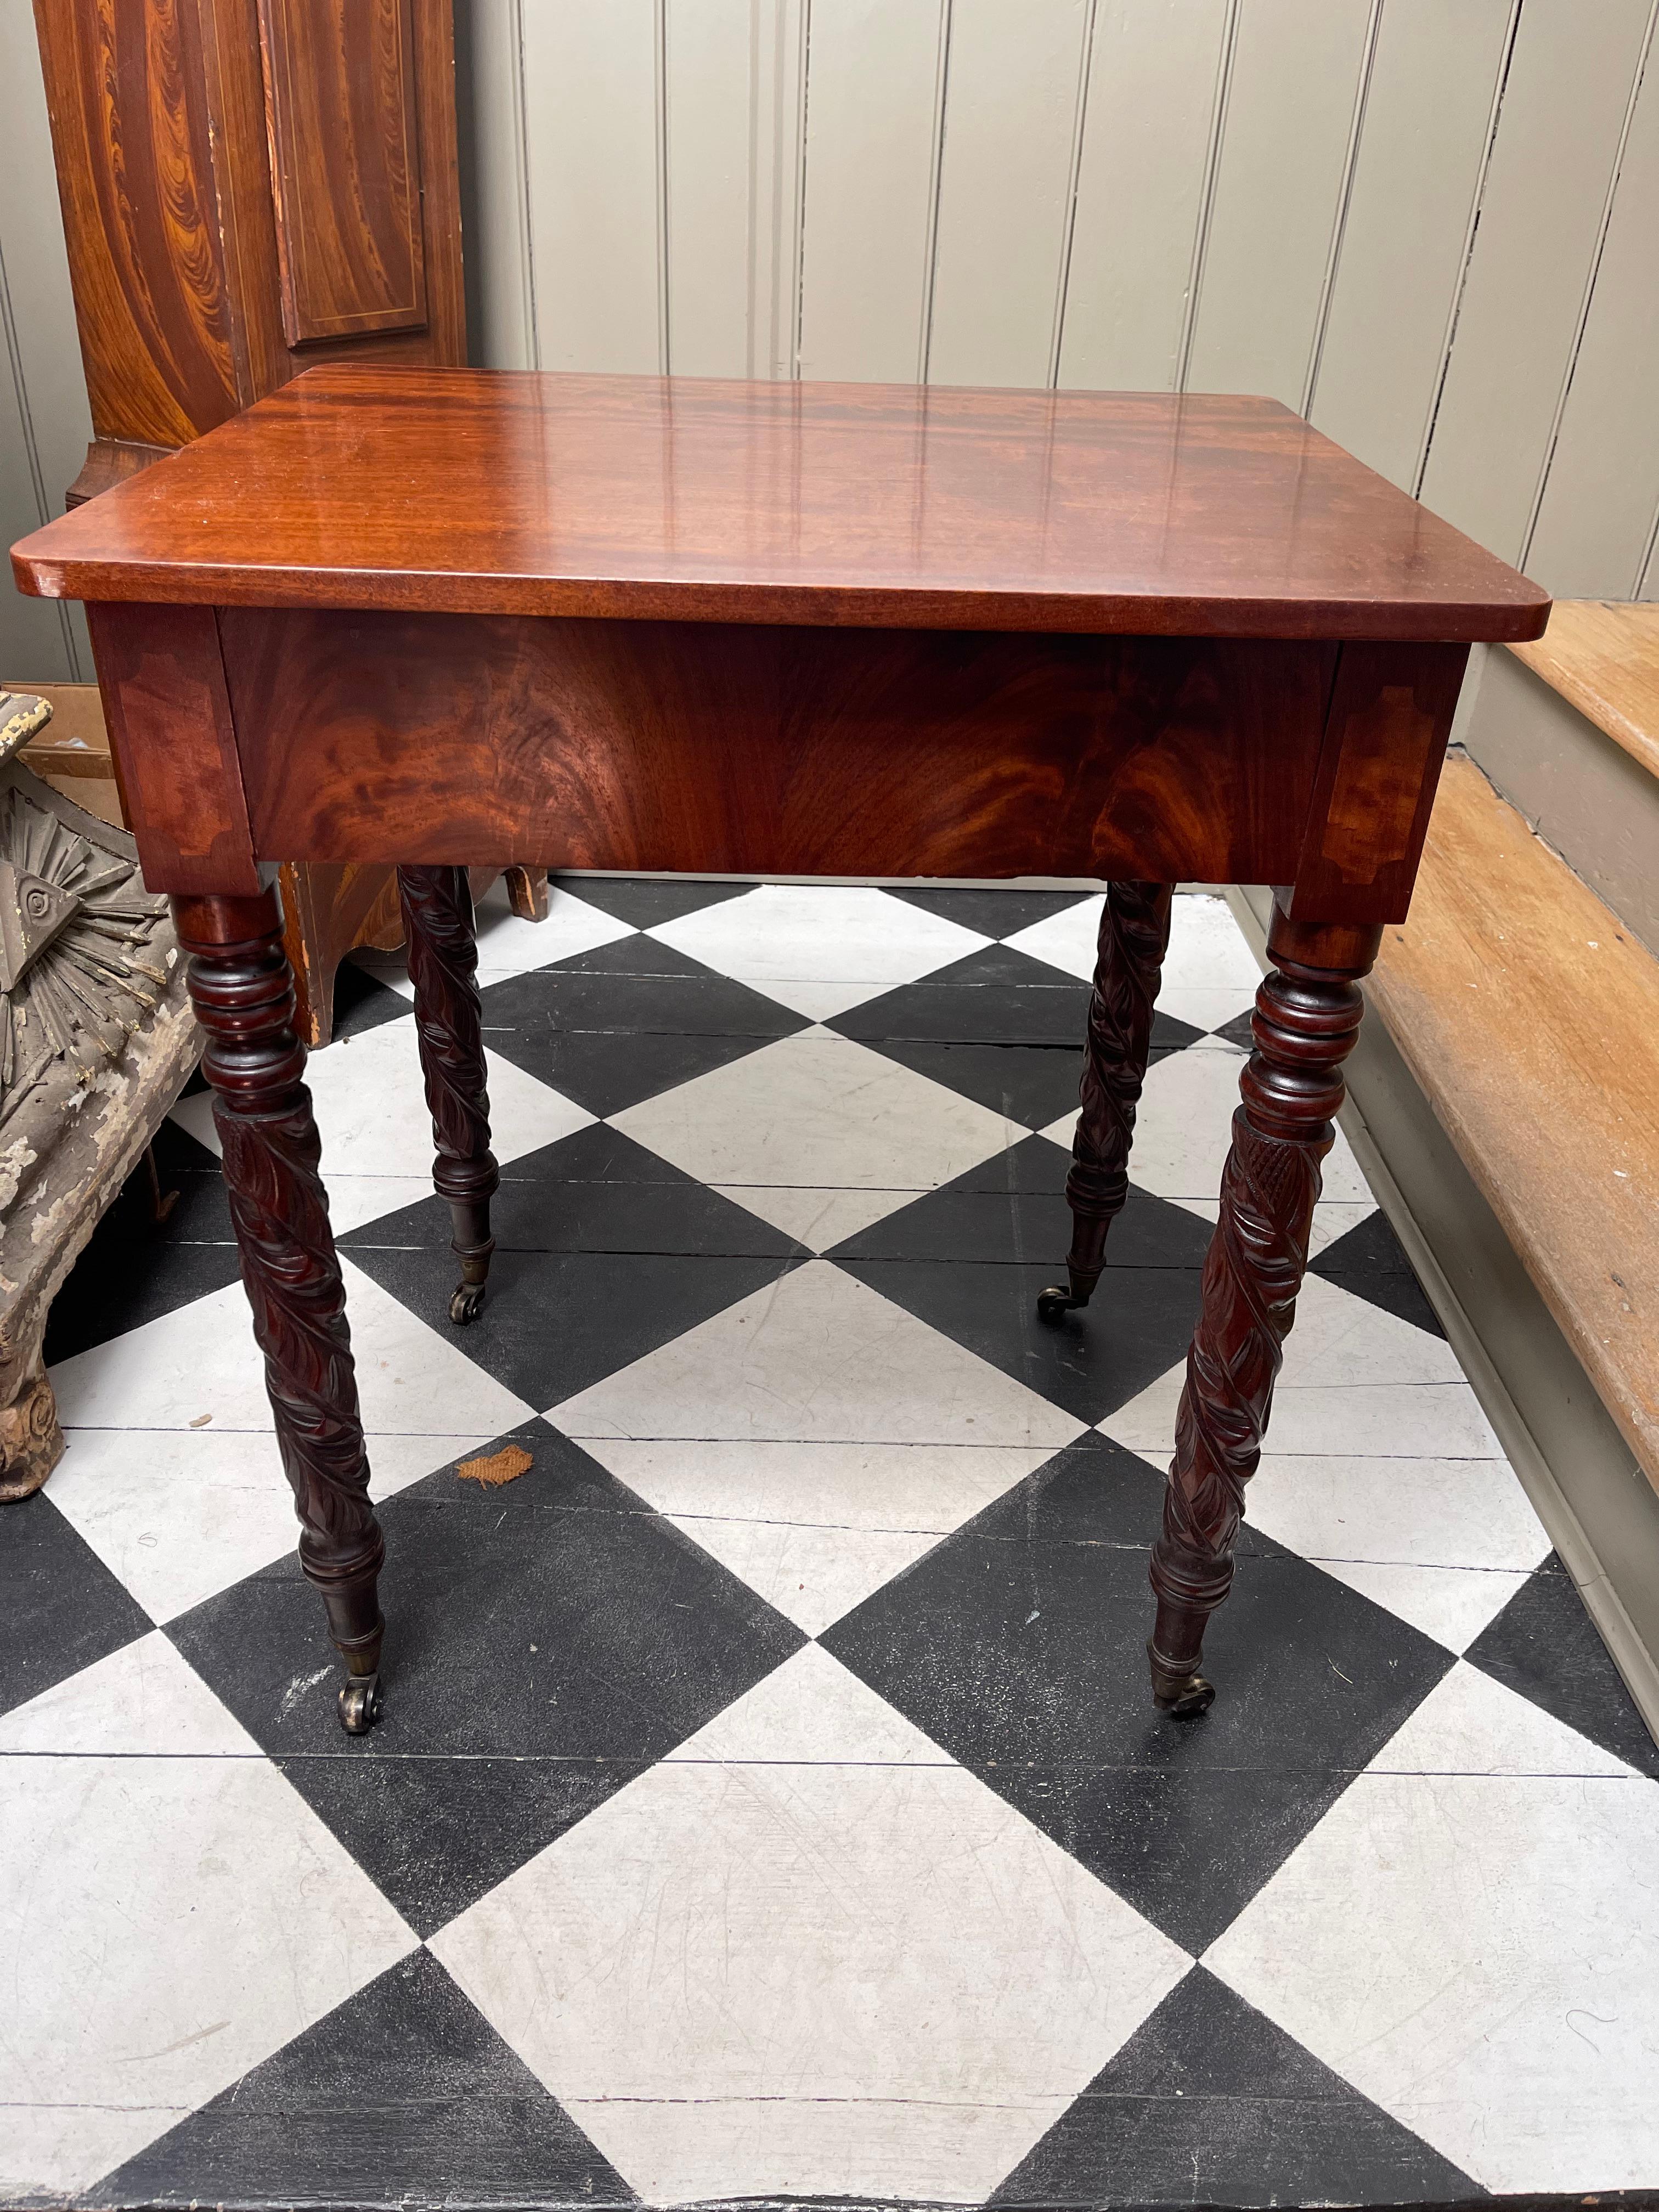 Two Late Federal Style Side Tables. Mahogany with beautiful New England carved and tapered legs. No drawers.

This similar pair were adapted from possibly a dining table, using all period elements to create them.